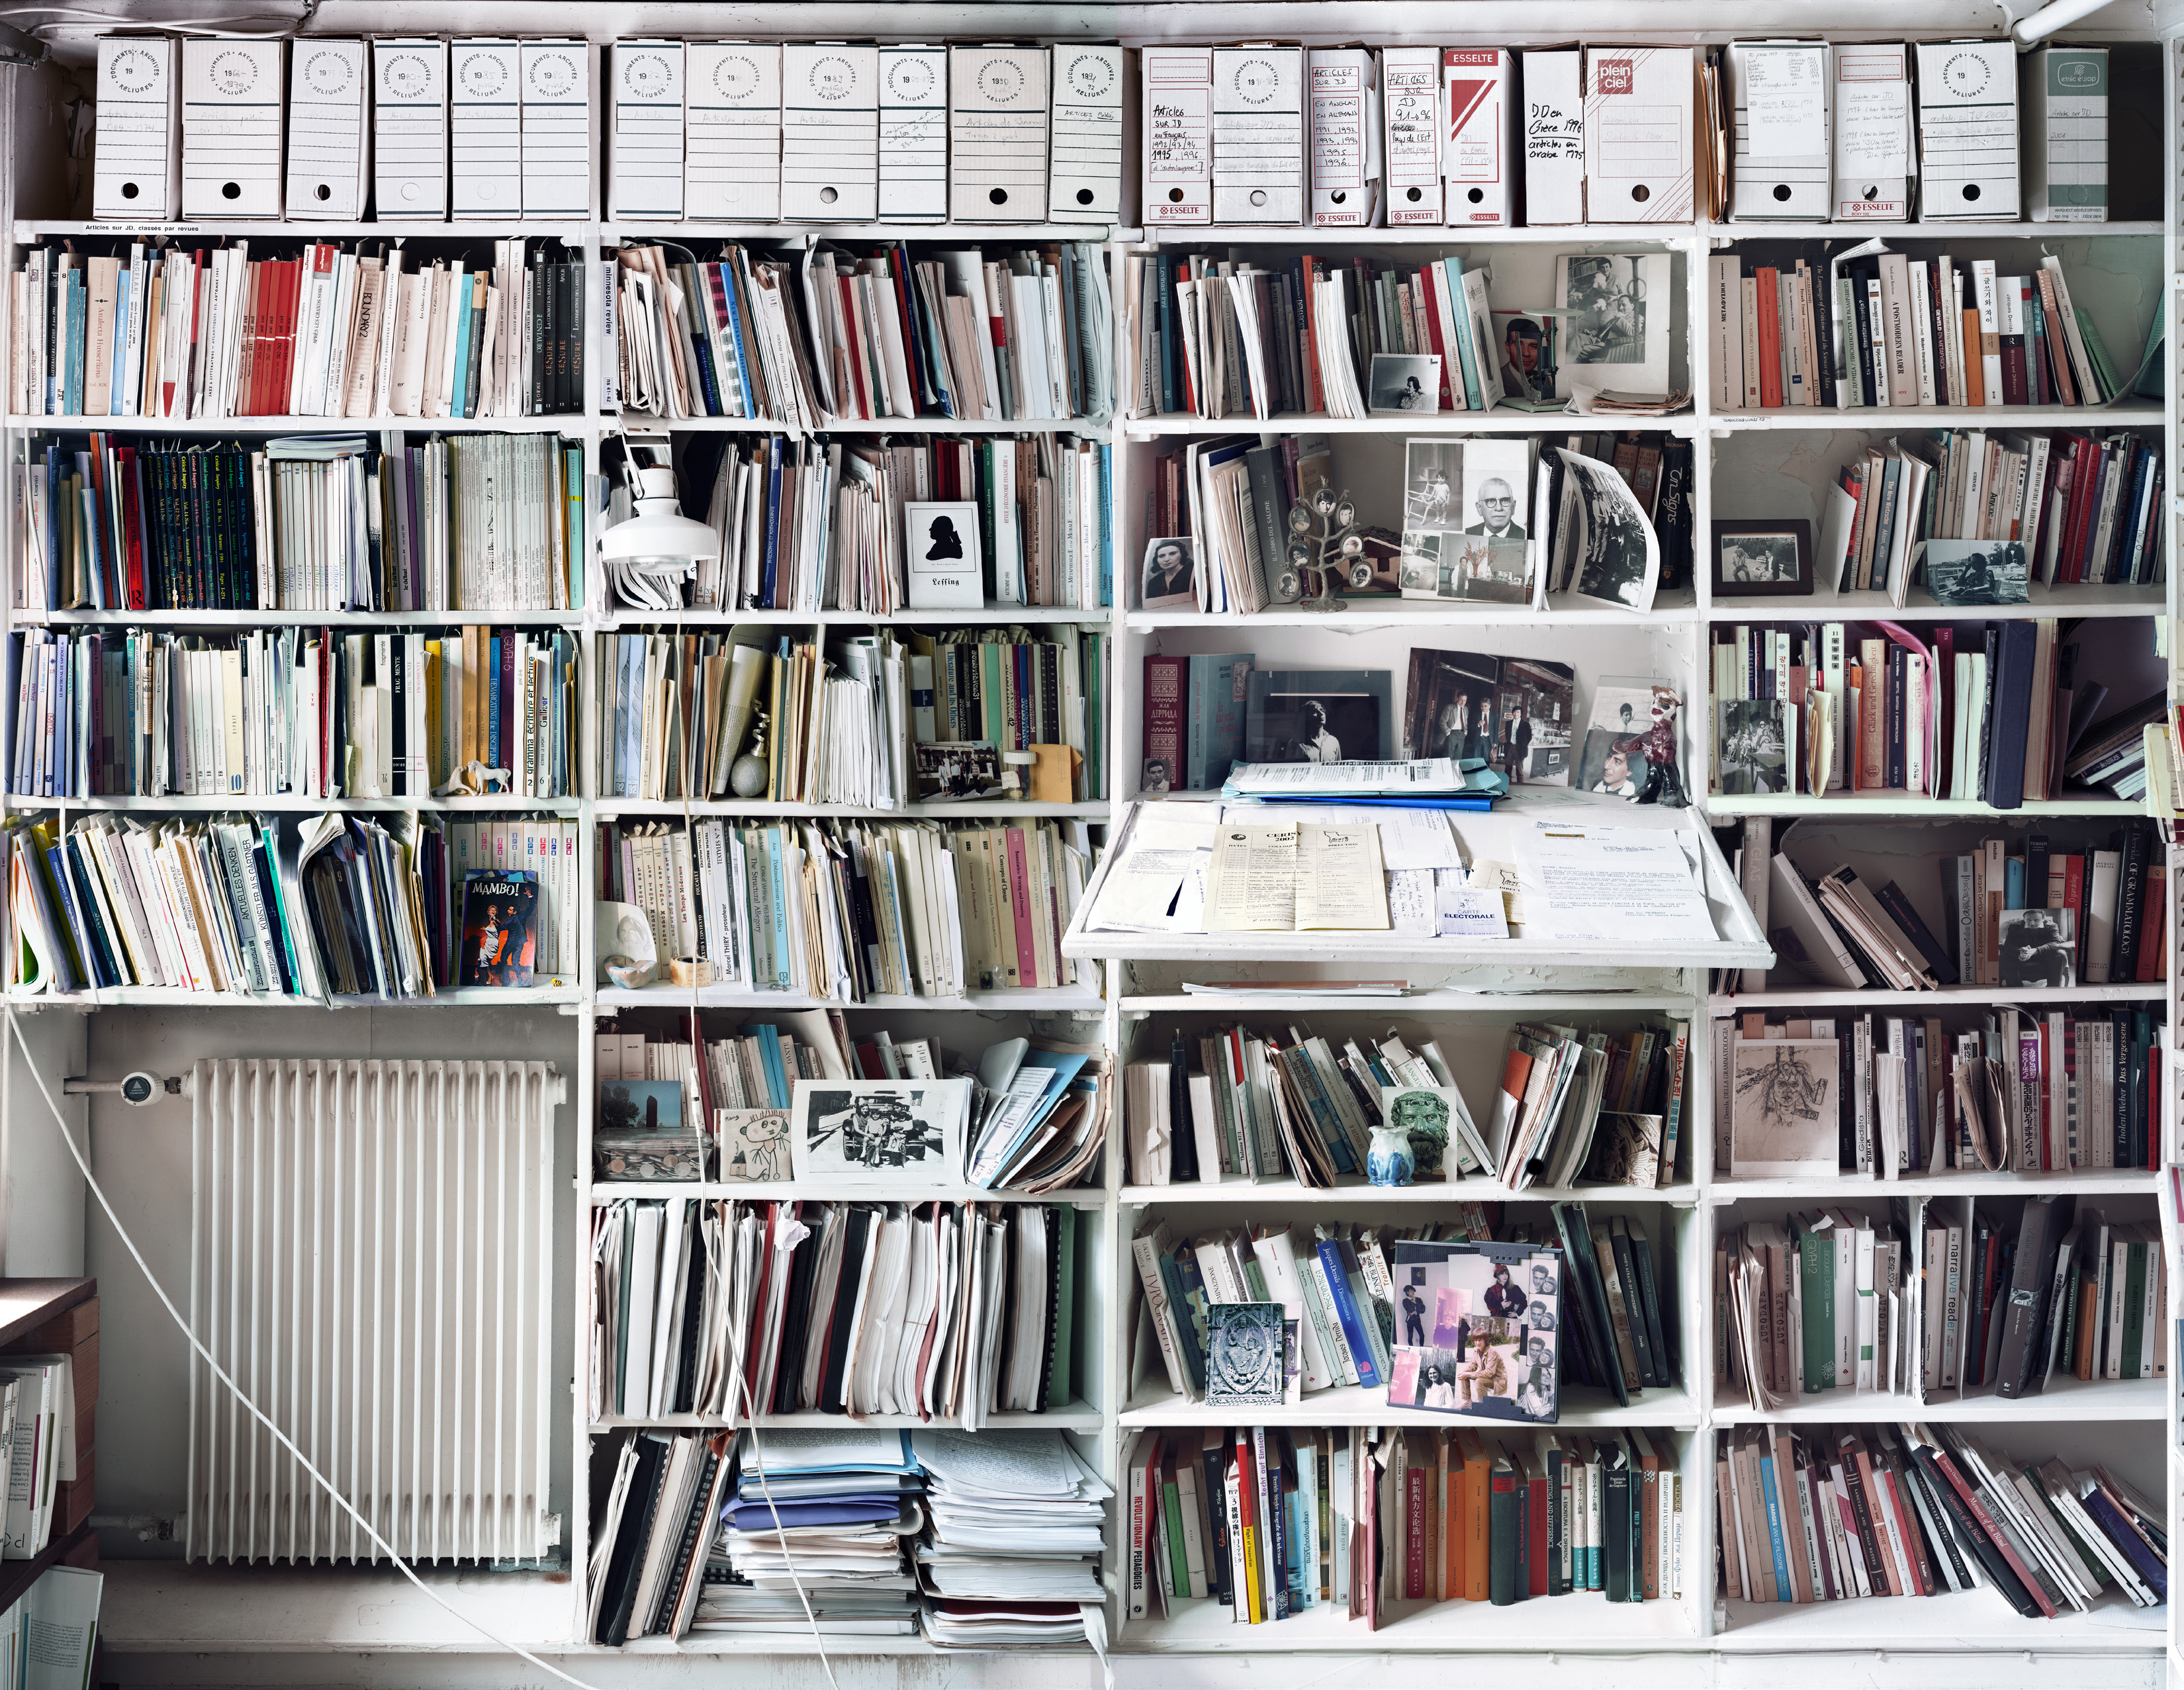 A view of part of Jacques Derrida's library in his home in Ris Organgis.